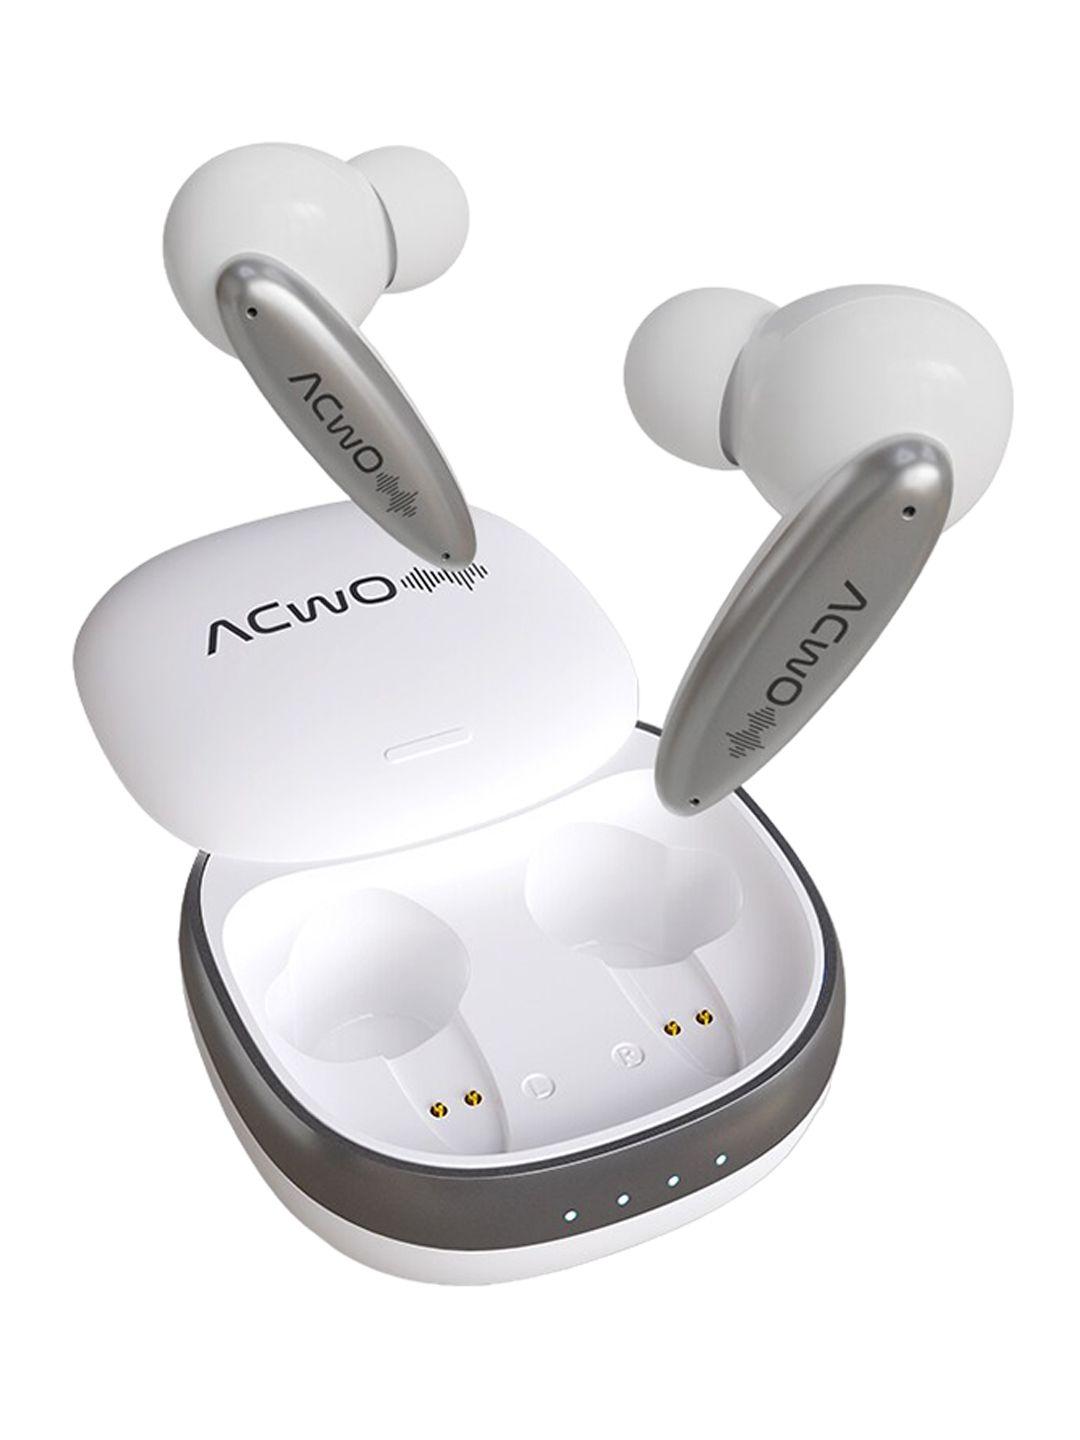 acwo dwots 717 slide n connect wireless earbuds 52h playtime with enc